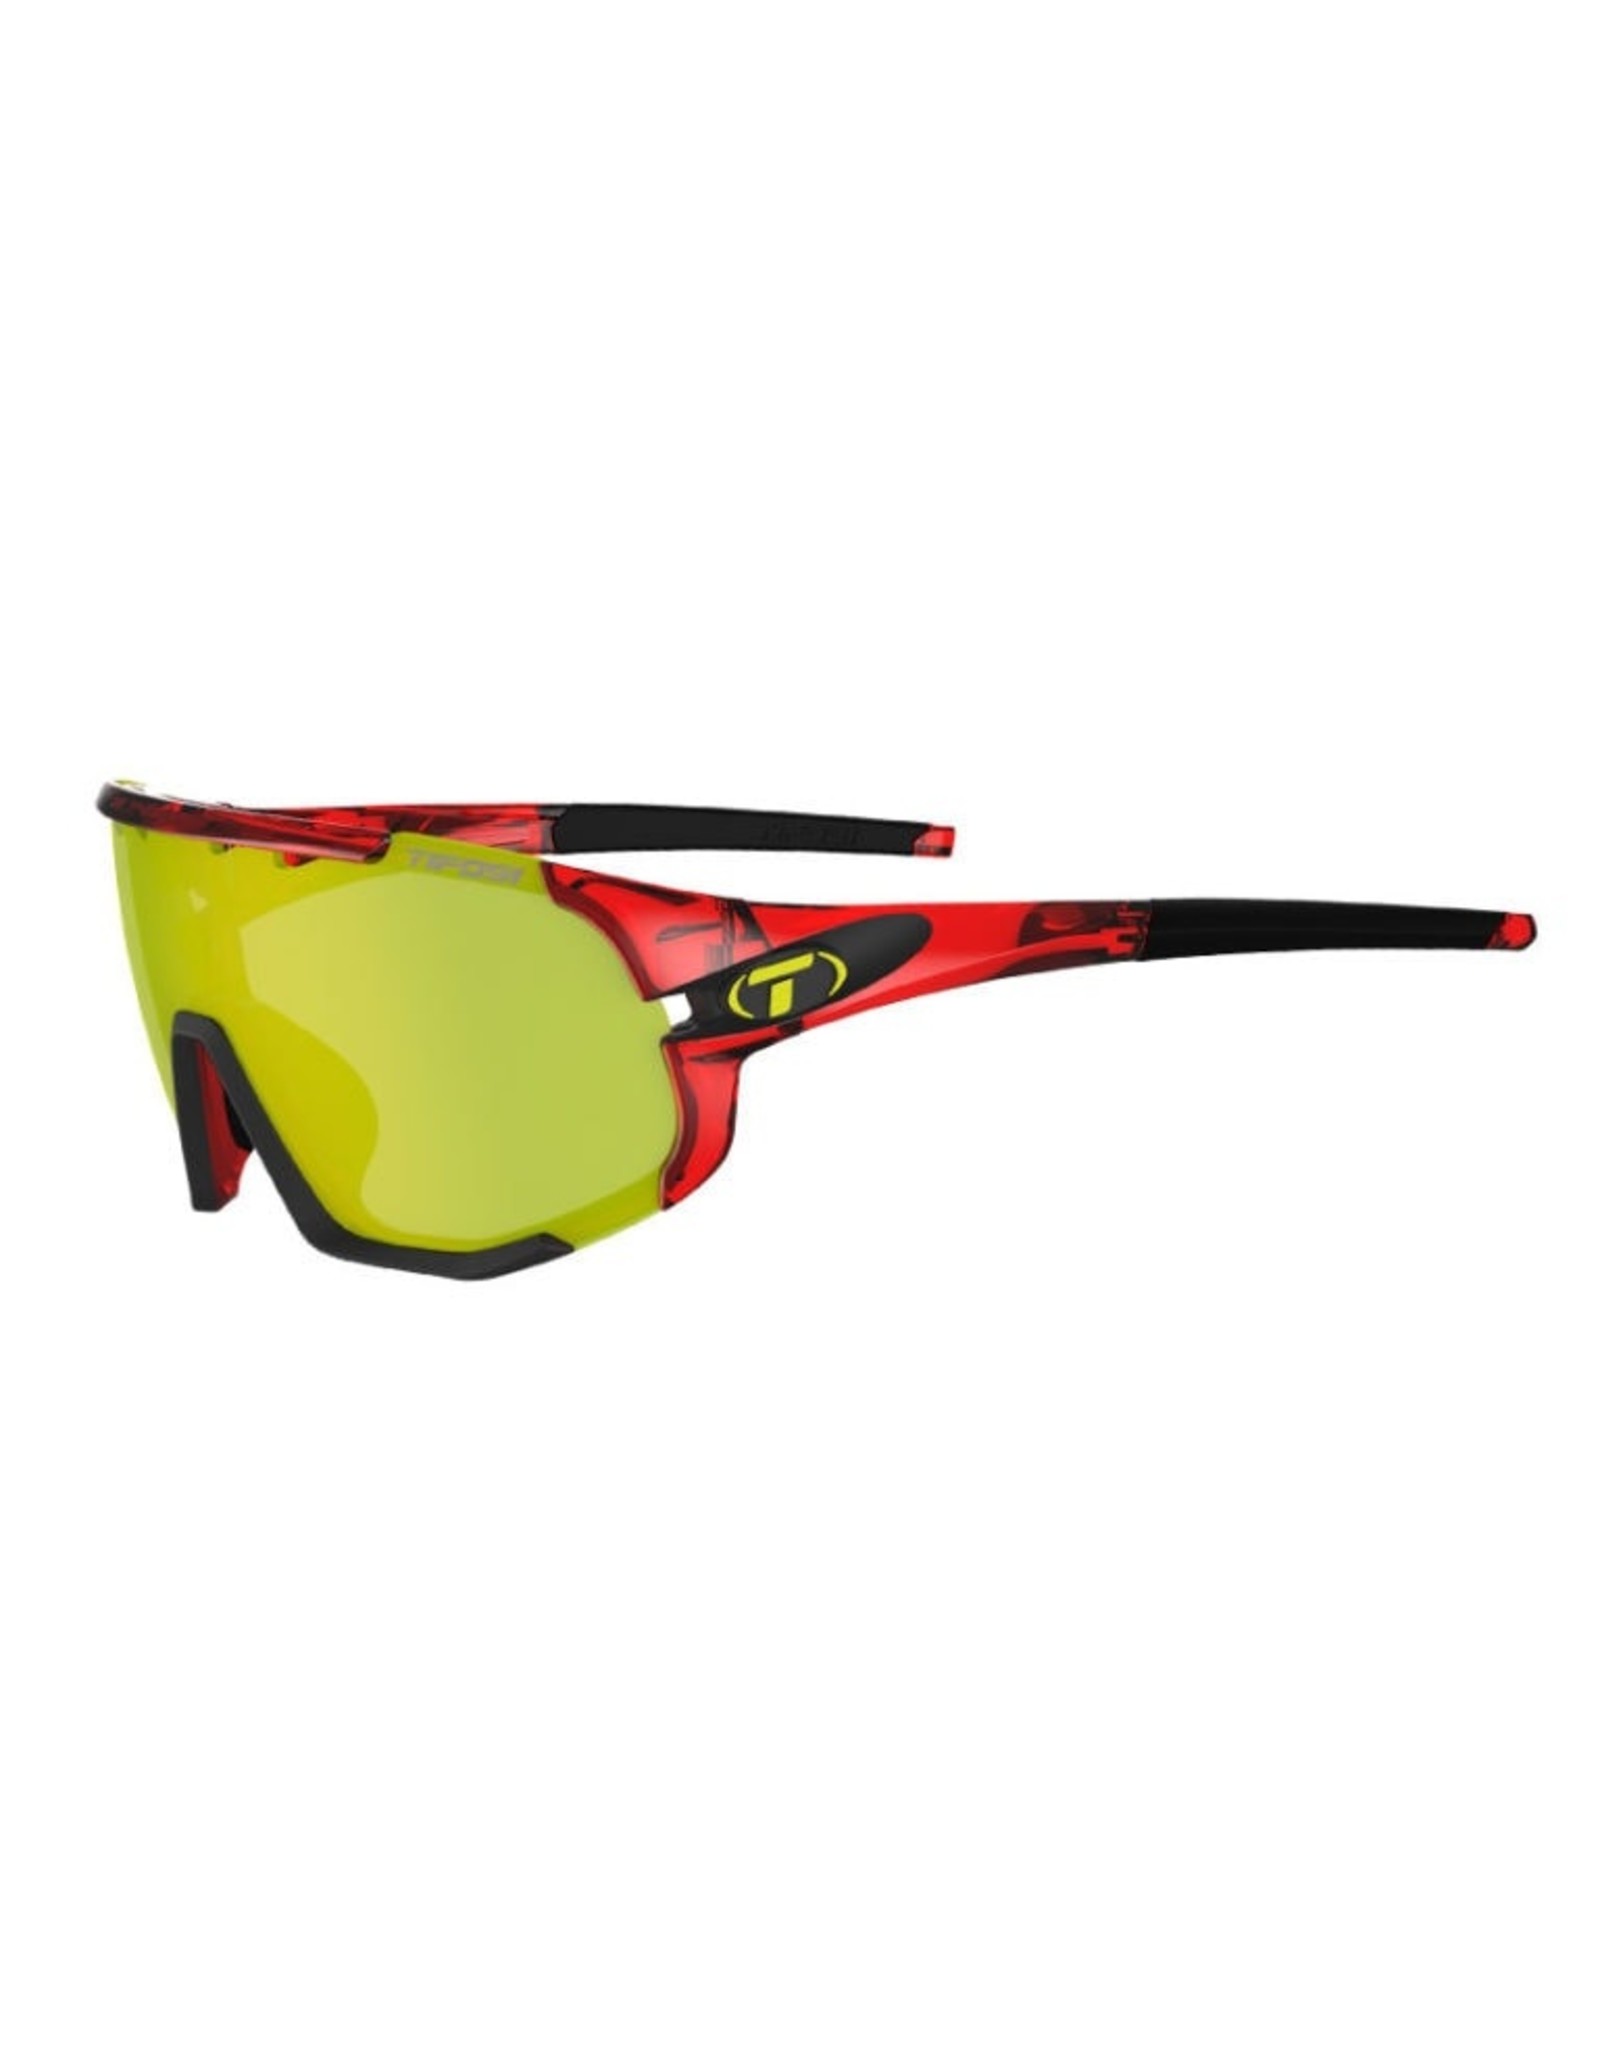 Tifosi Optics Sledge, Crystal Red Interchangeable Sunglasses - Clarion Yellow/AC Red/Clear